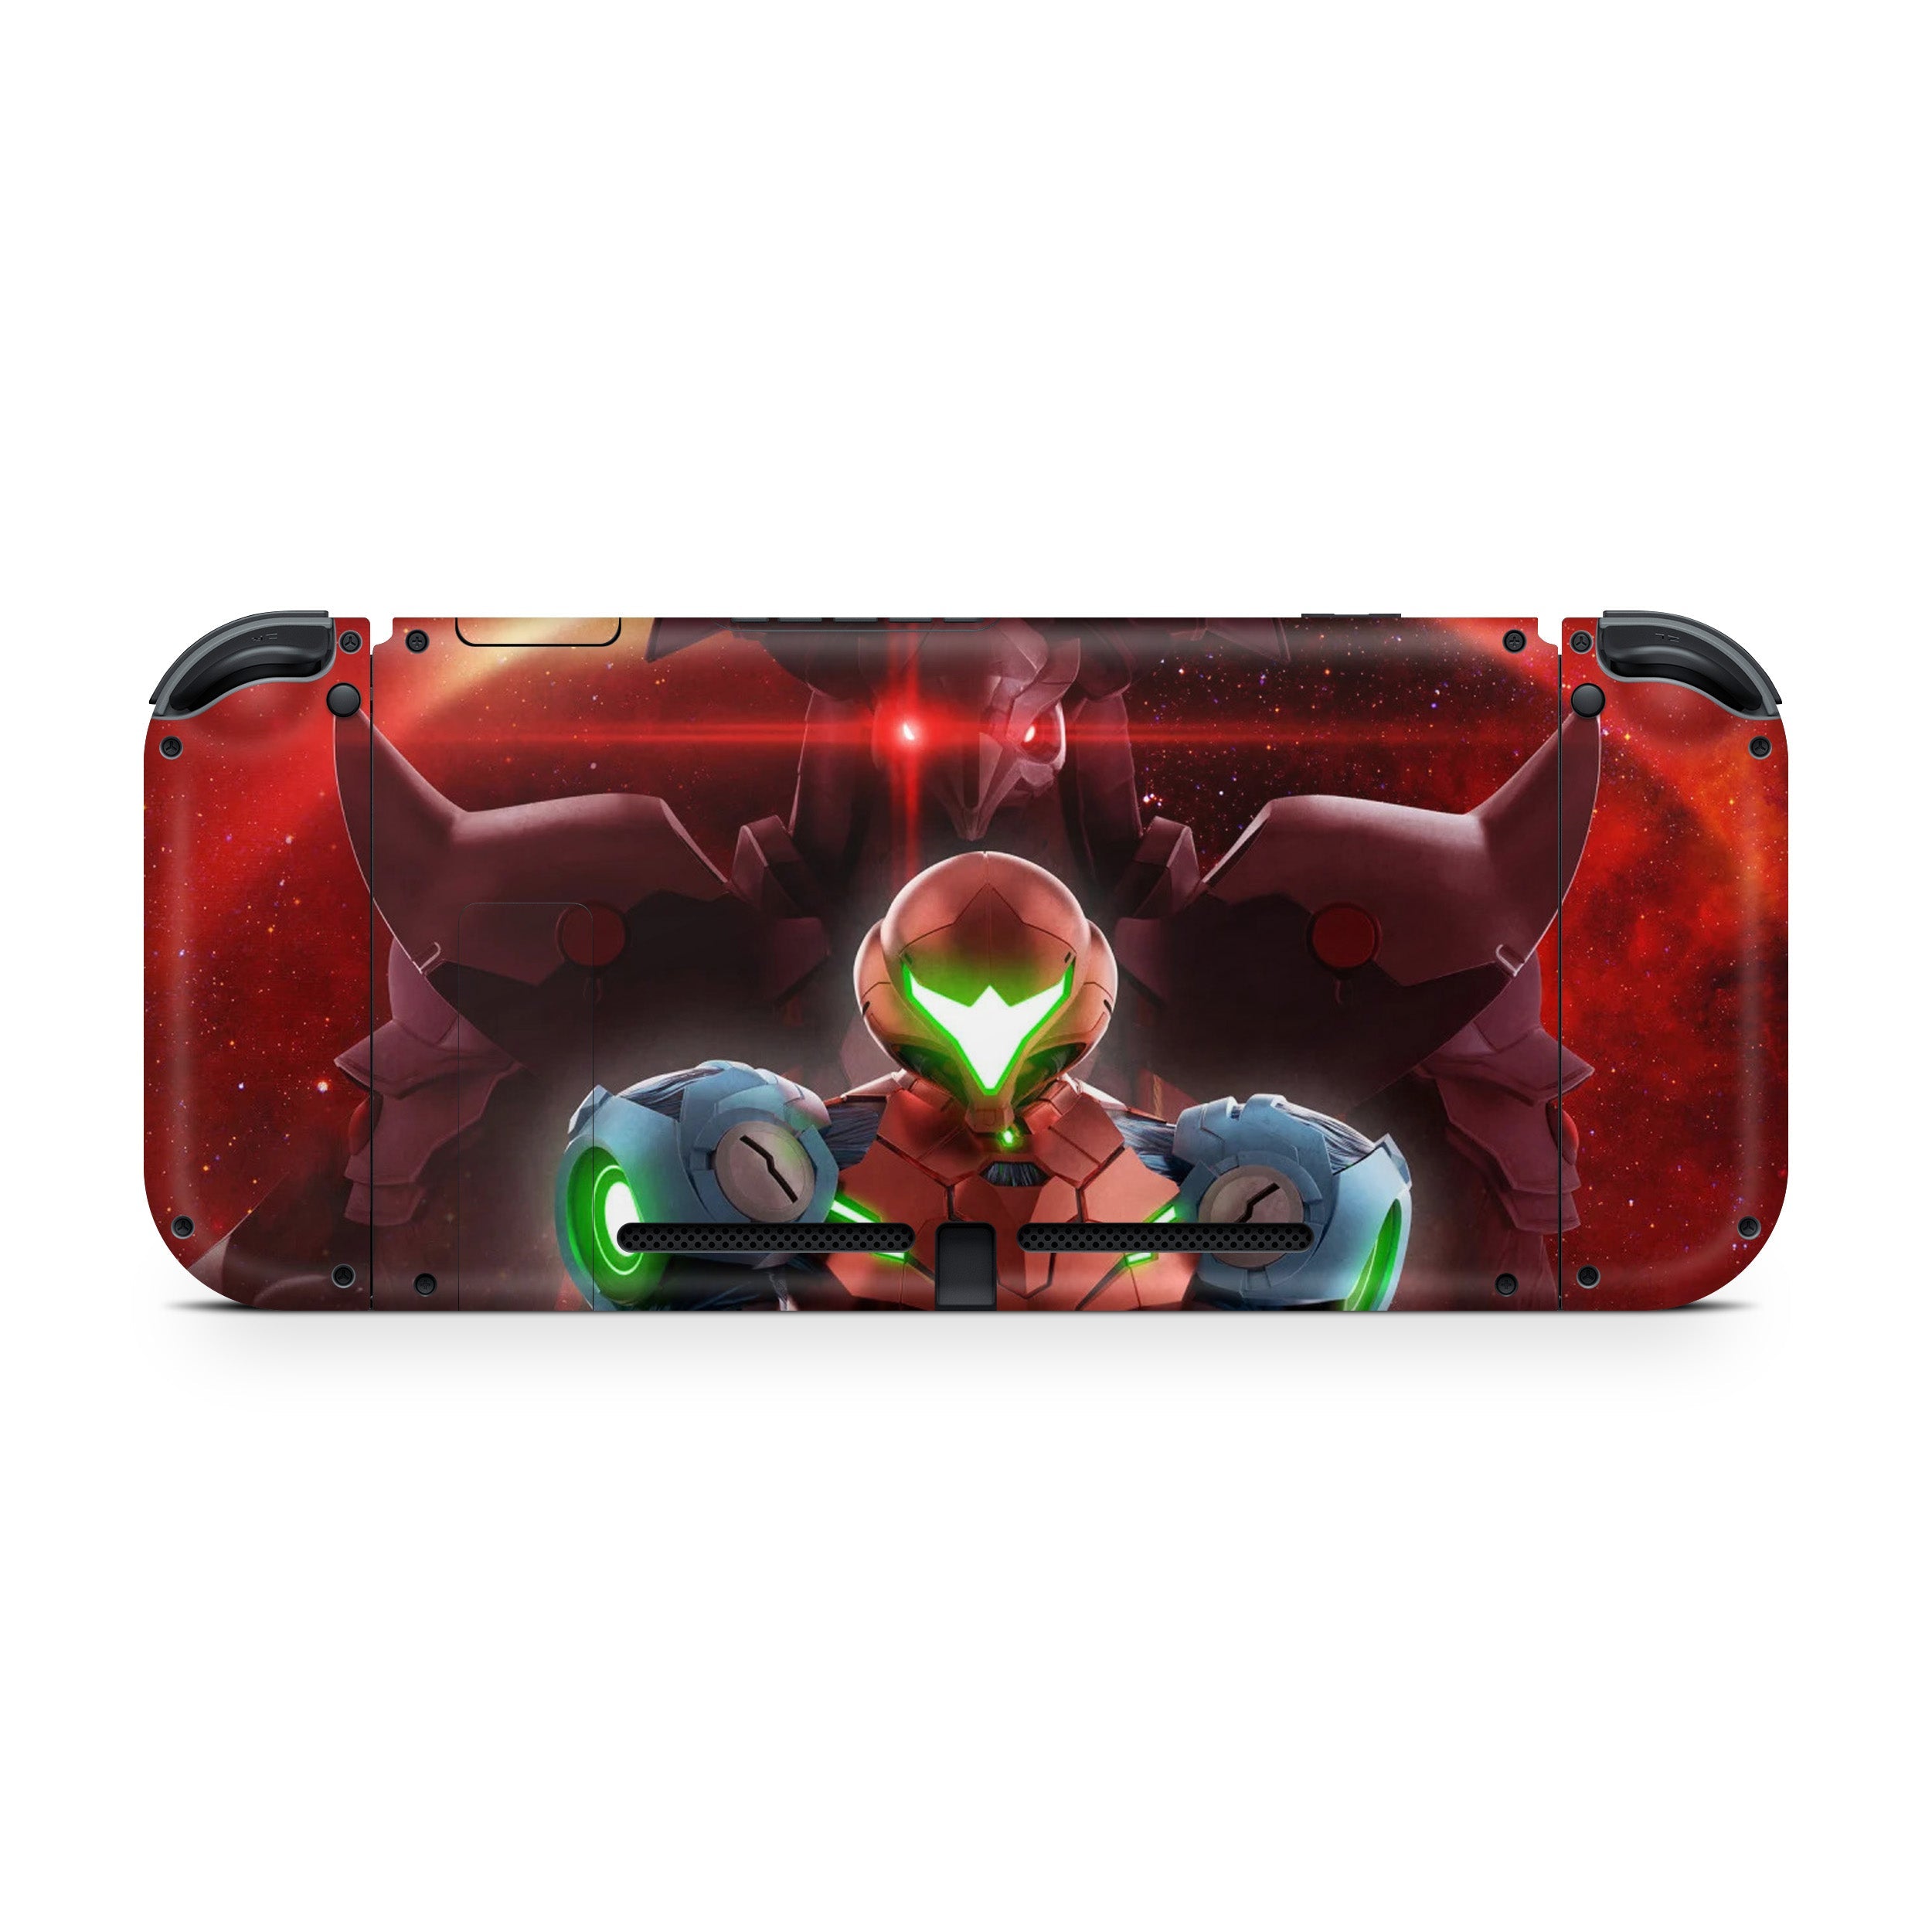 A video game skin featuring a Metroid Dread design for the Nintendo Switch.